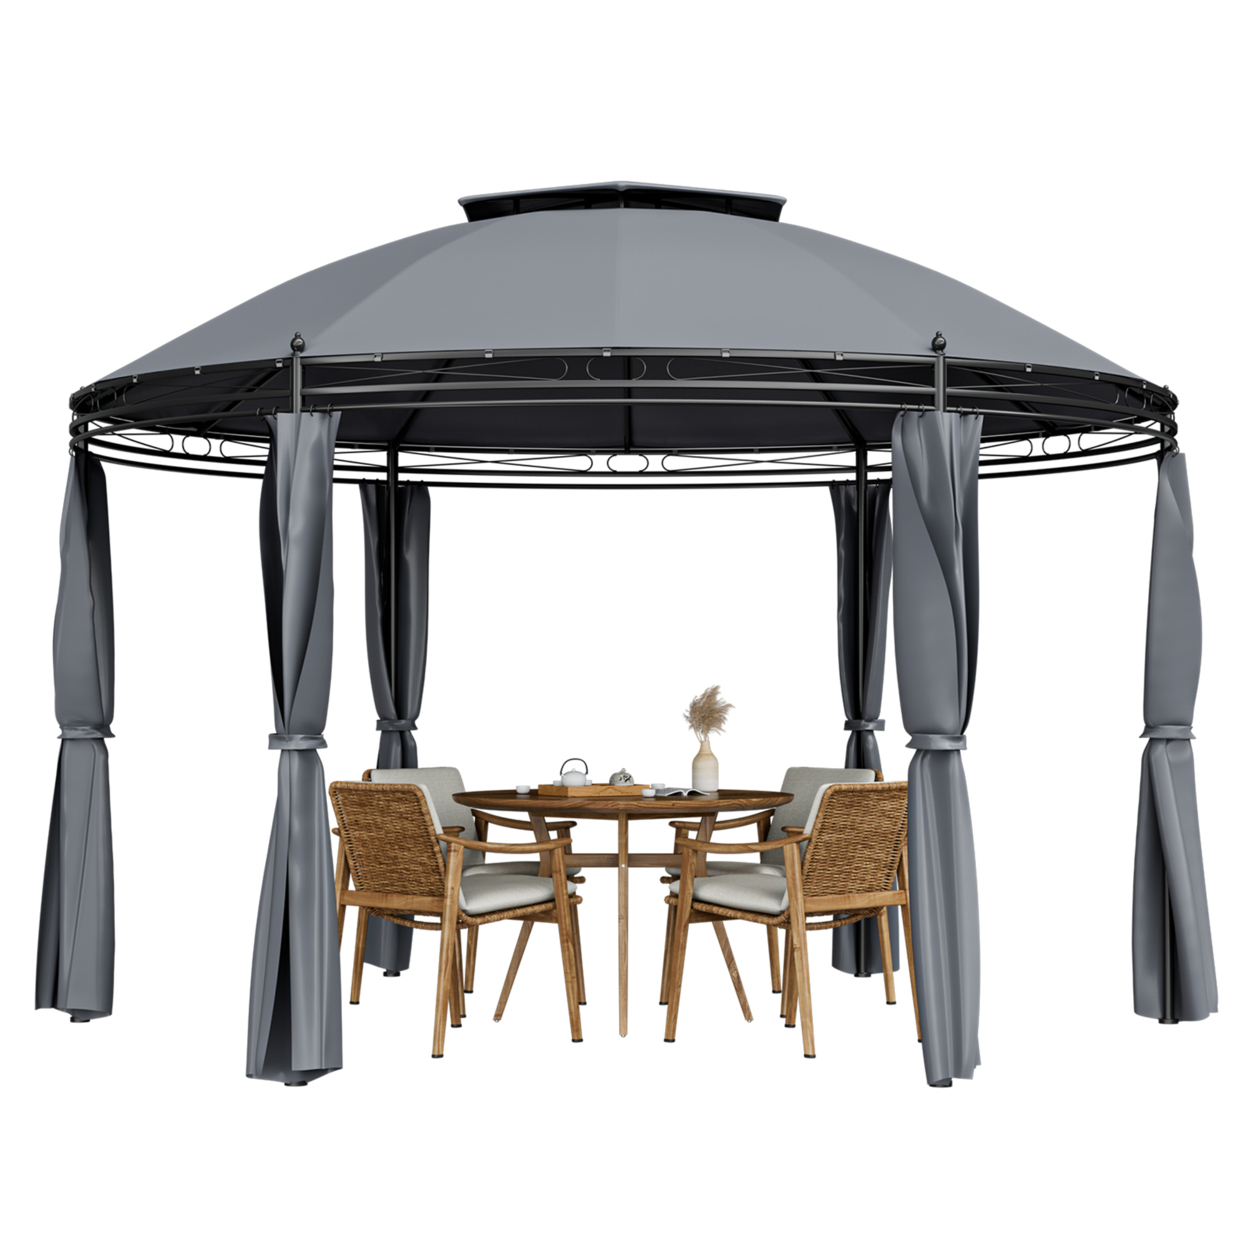 11.5' Outdoor Patio Round Dome Gazebo Canopy Shelter Double Roof Steel Gray